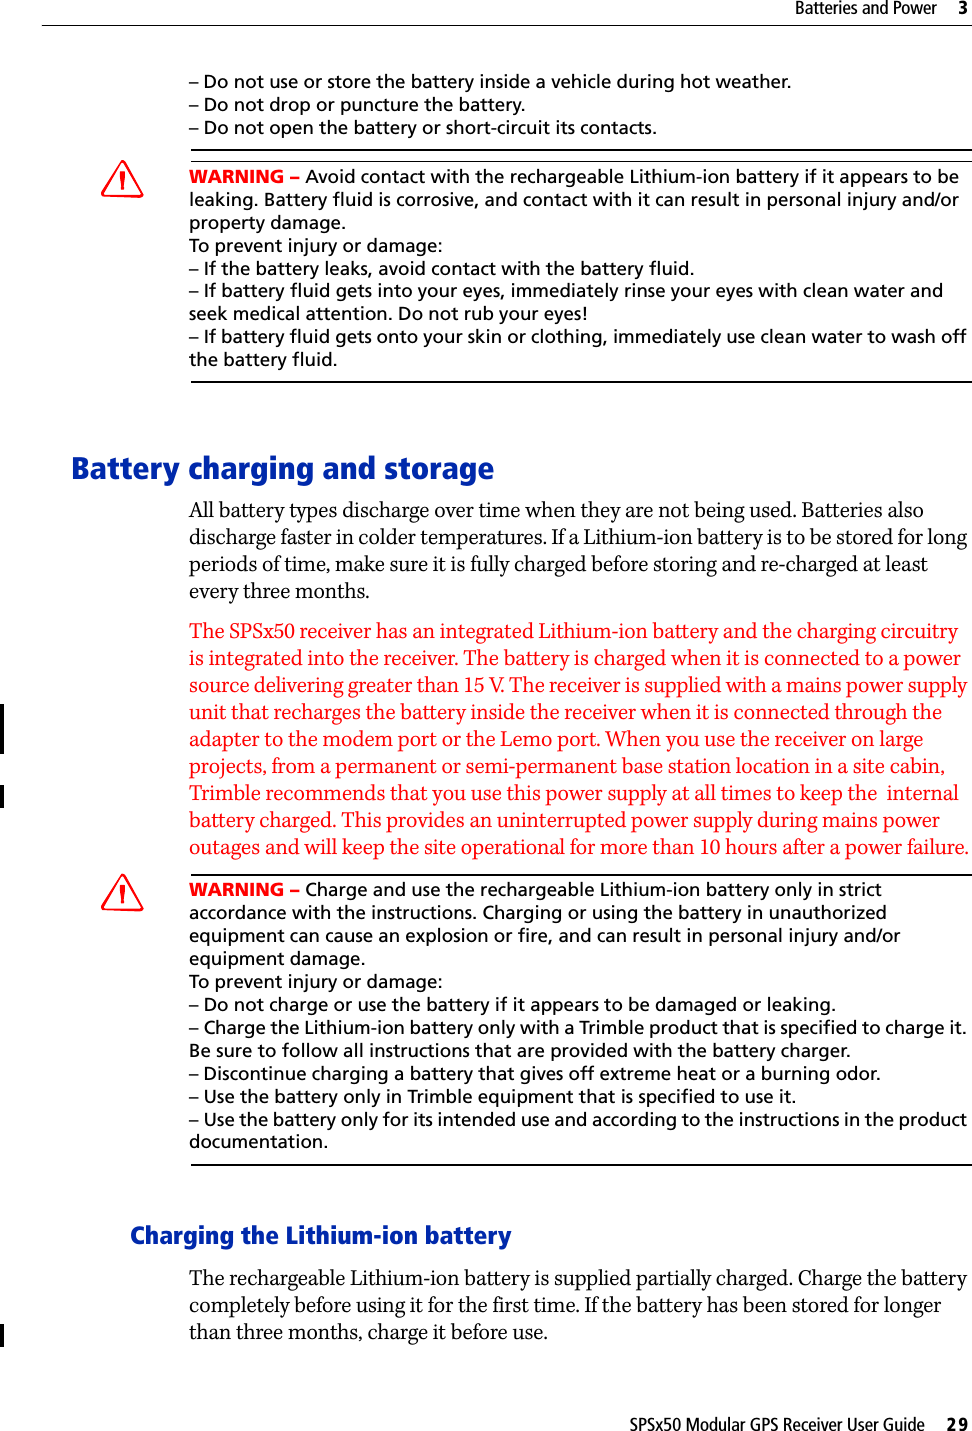 SPSx50 Modular GPS Receiver User Guide     29Batteries and Power     3– Do not use or store the battery inside a vehicle during hot weather. – Do not drop or puncture the battery. – Do not open the battery or short-circuit its contacts.CWARNING – Avoid contact with the rechargeable Lithium-ion battery if it appears to be leaking. Battery fluid is corrosive, and contact with it can result in personal injury and/or property damage.To prevent injury or damage:– If the battery leaks, avoid contact with the battery fluid. – If battery fluid gets into your eyes, immediately rinse your eyes with clean water and seek medical attention. Do not rub your eyes! – If battery fluid gets onto your skin or clothing, immediately use clean water to wash off the battery fluid.Battery charging and storageAll battery types discharge over time when they are not being used. Batteries also discharge faster in colder temperatures. If a Lithium-ion battery is to be stored for long periods of time, make sure it is fully charged before storing and re-charged at least every three months.The SPSx50 receiver has an integrated Lithium-ion battery and the charging circuitry is integrated into the receiver. The battery is charged when it is connected to a power source delivering greater than 15 V. The receiver is supplied with a mains power supply unit that recharges the battery inside the receiver when it is connected through the adapter to the modem port or the Lemo port. When you use the receiver on large projects, from a permanent or semi-permanent base station location in a site cabin, Trimble recommends that you use this power supply at all times to keep the  internal battery charged. This provides an uninterrupted power supply during mains power outages and will keep the site operational for more than 10 hours after a power failure.CWARNING – Charge and use the rechargeable Lithium-ion battery only in strict accordance with the instructions. Charging or using the battery in unauthorized equipment can cause an explosion or fire, and can result in personal injury and/or equipment damage. To prevent injury or damage: – Do not charge or use the battery if it appears to be damaged or leaking.– Charge the Lithium-ion battery only with a Trimble product that is specified to charge it. Be sure to follow all instructions that are provided with the battery charger. – Discontinue charging a battery that gives off extreme heat or a burning odor.– Use the battery only in Trimble equipment that is specified to use it. – Use the battery only for its intended use and according to the instructions in the product documentation.Charging the Lithium-ion batteryThe rechargeable Lithium-ion battery is supplied partially charged. Charge the battery completely before using it for the first time. If the battery has been stored for longer than three months, charge it before use.